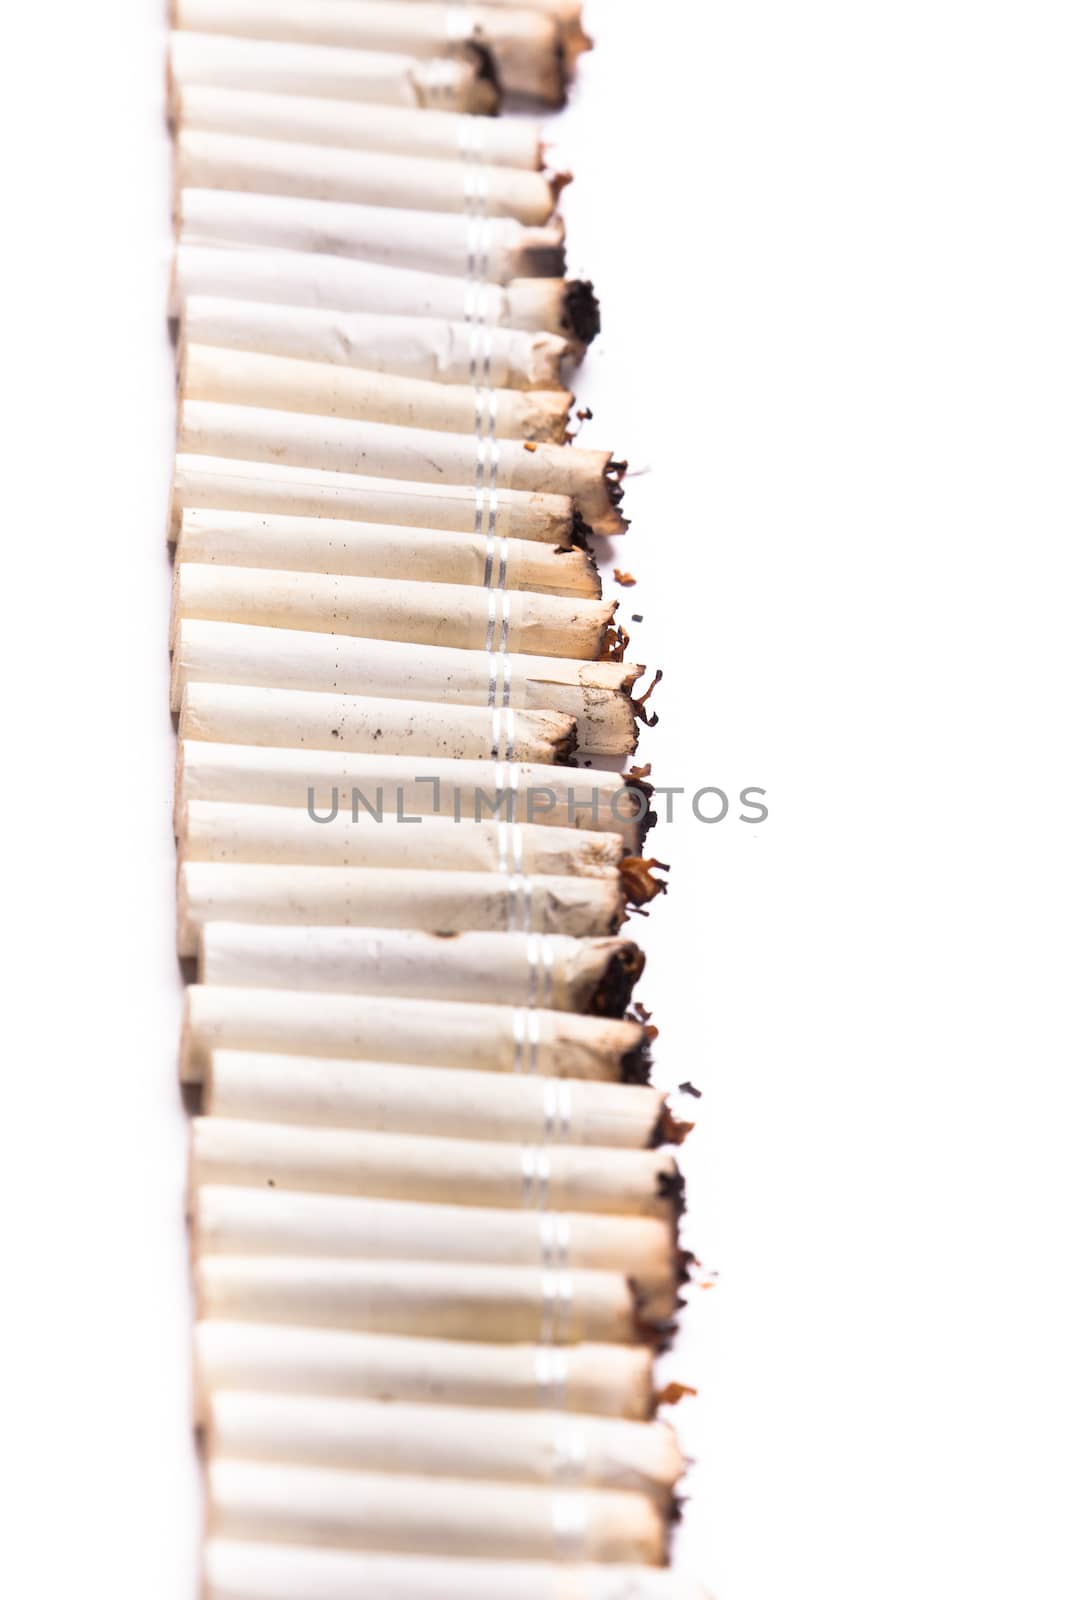 A line made of cigarette filters